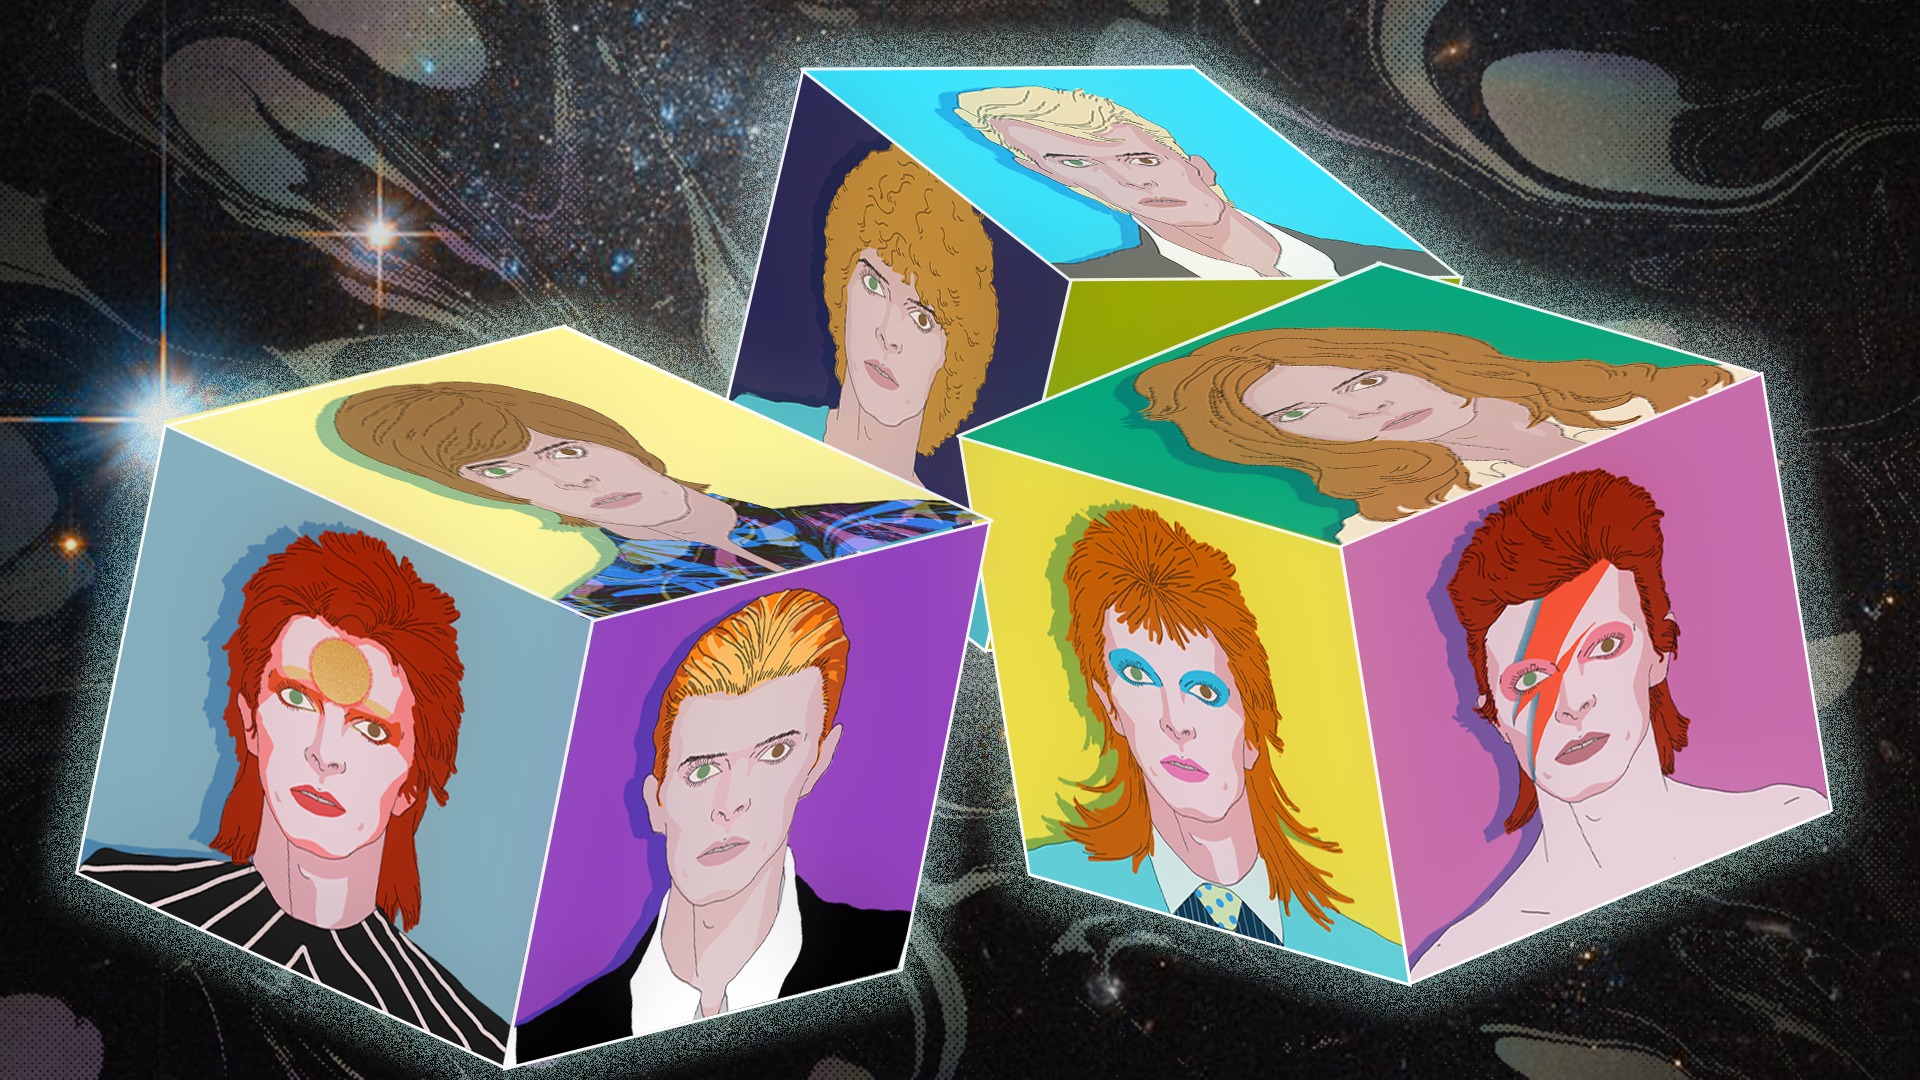 Multicoloured illustration of Bowie's different artistic phases